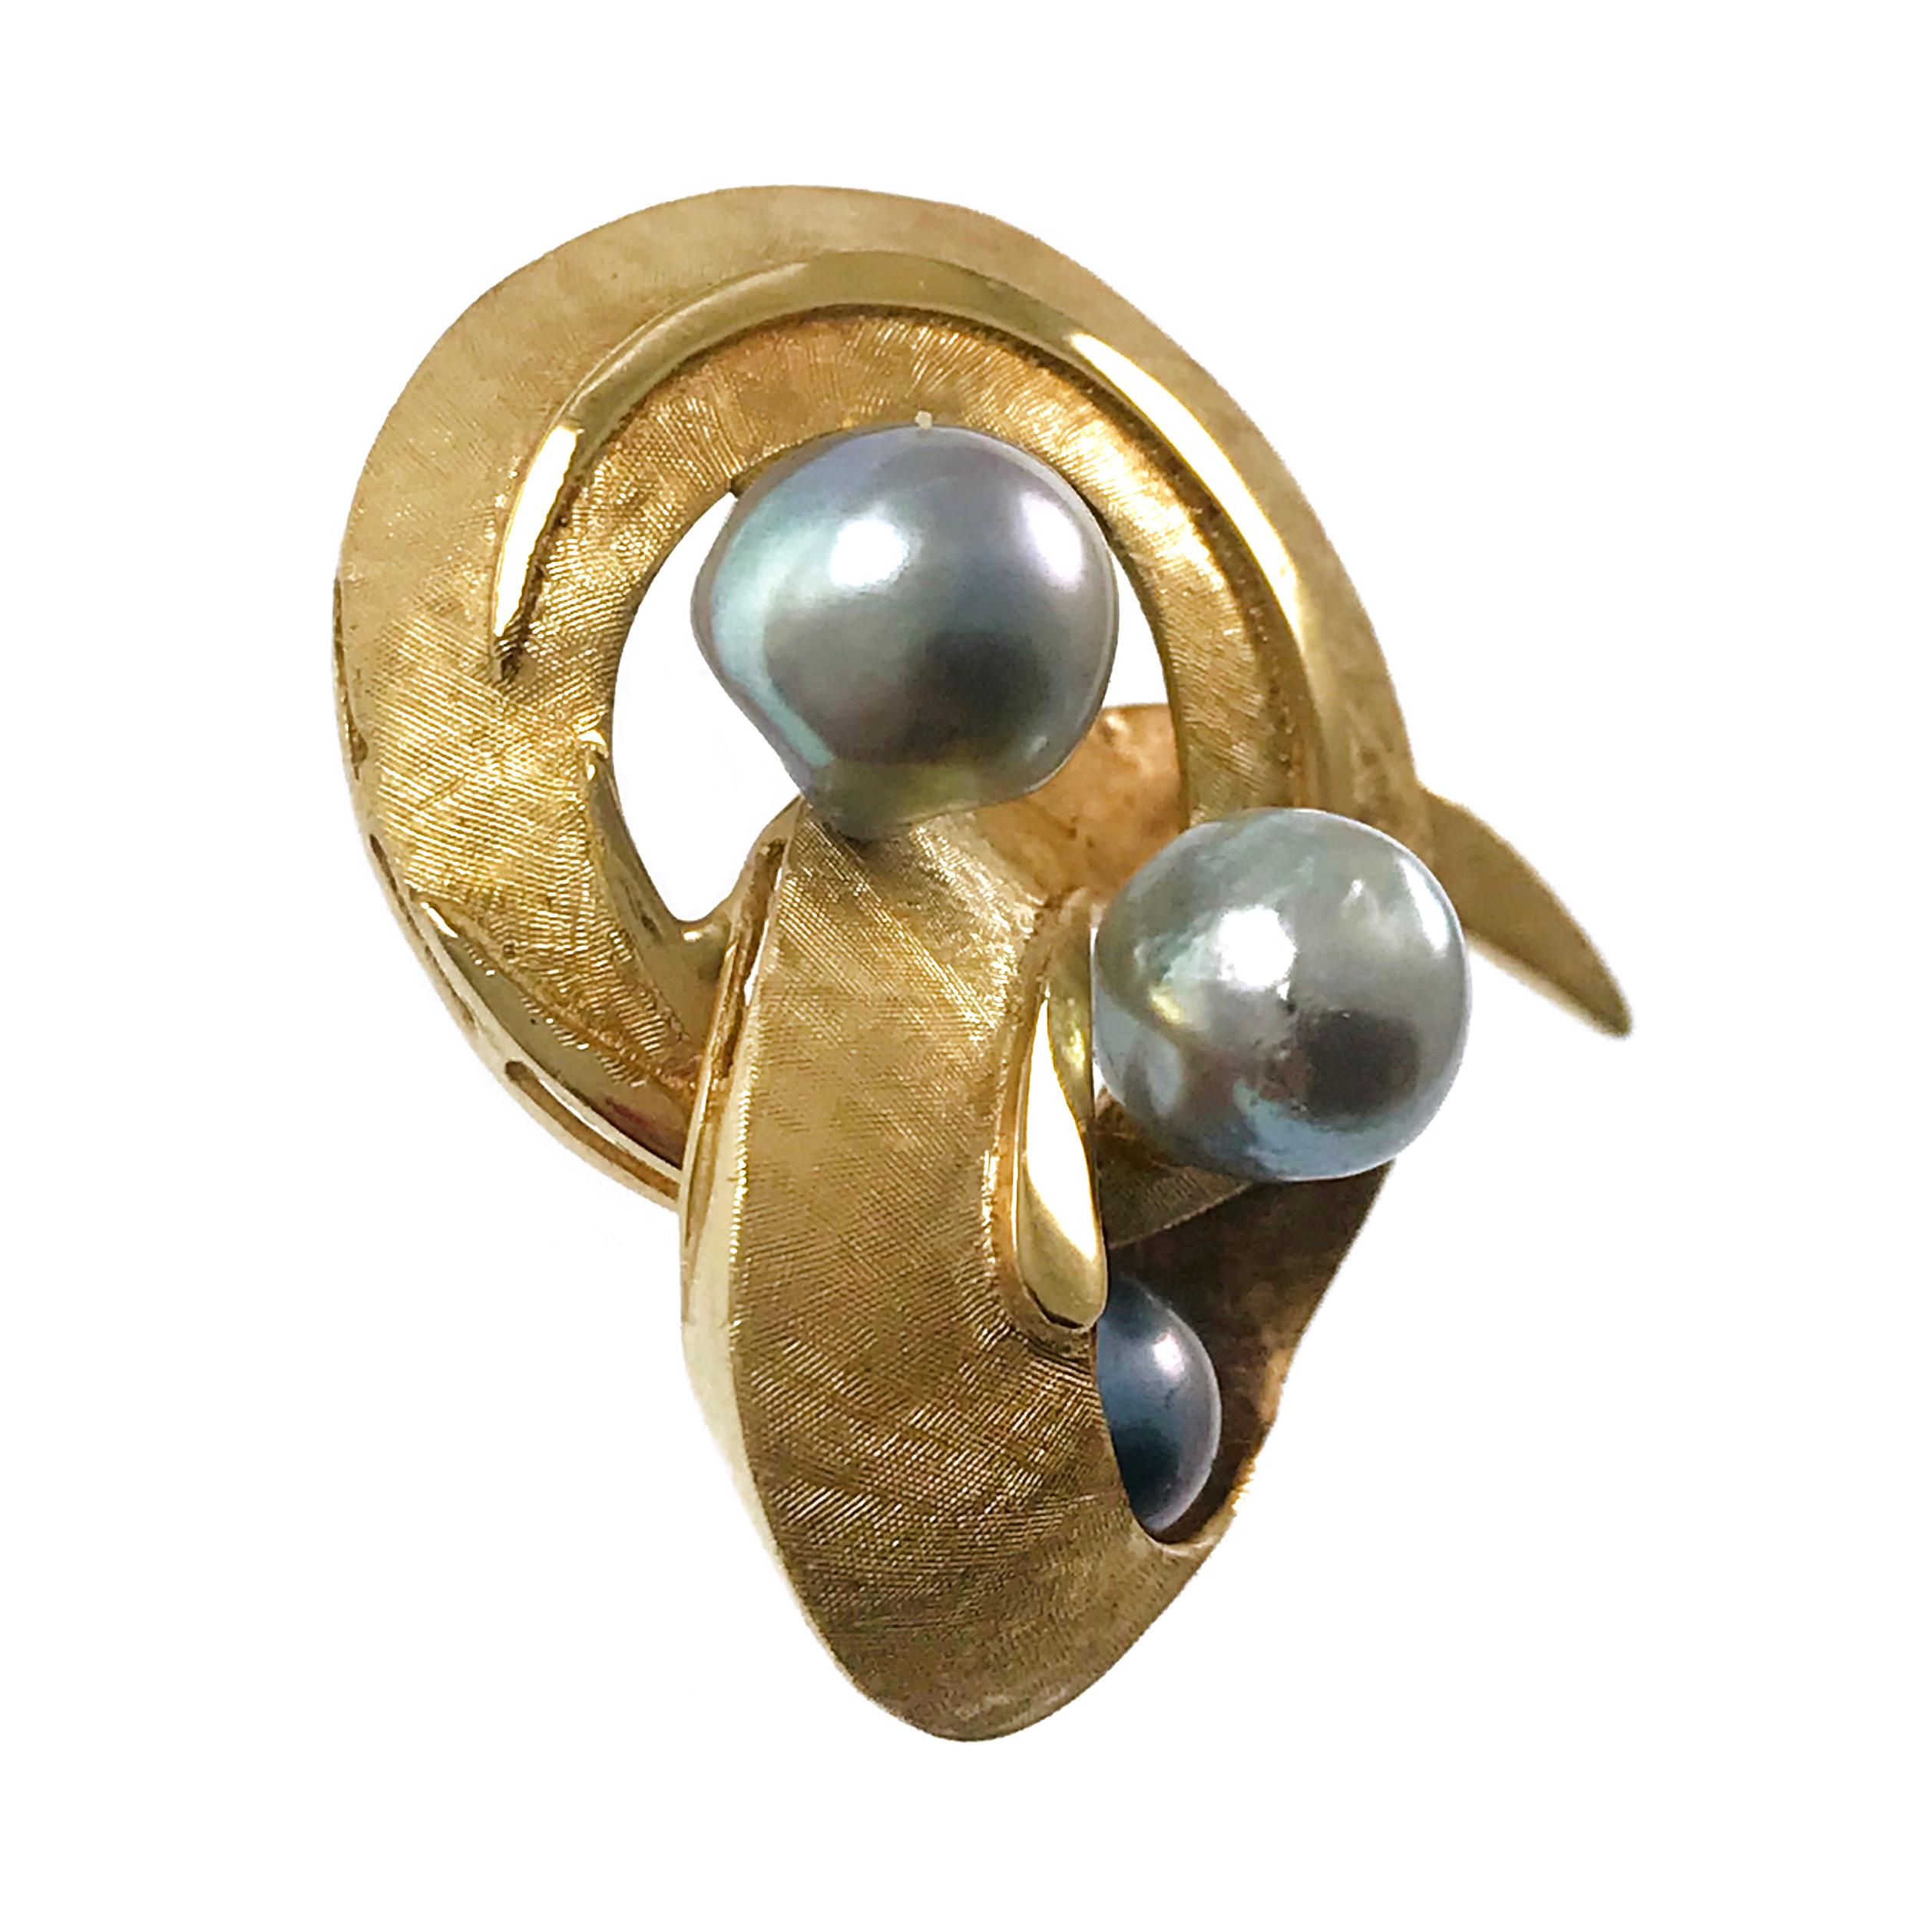 14 Karat J.R. Co Pearl Swirl Brooch. This brooch features three Baroque blue-gray (drilled) Pearls in varying sizes set in a dynamic swirl. The gold swirl is textured in a Florentine finish with a smooth finish in the center. The Pearls are A